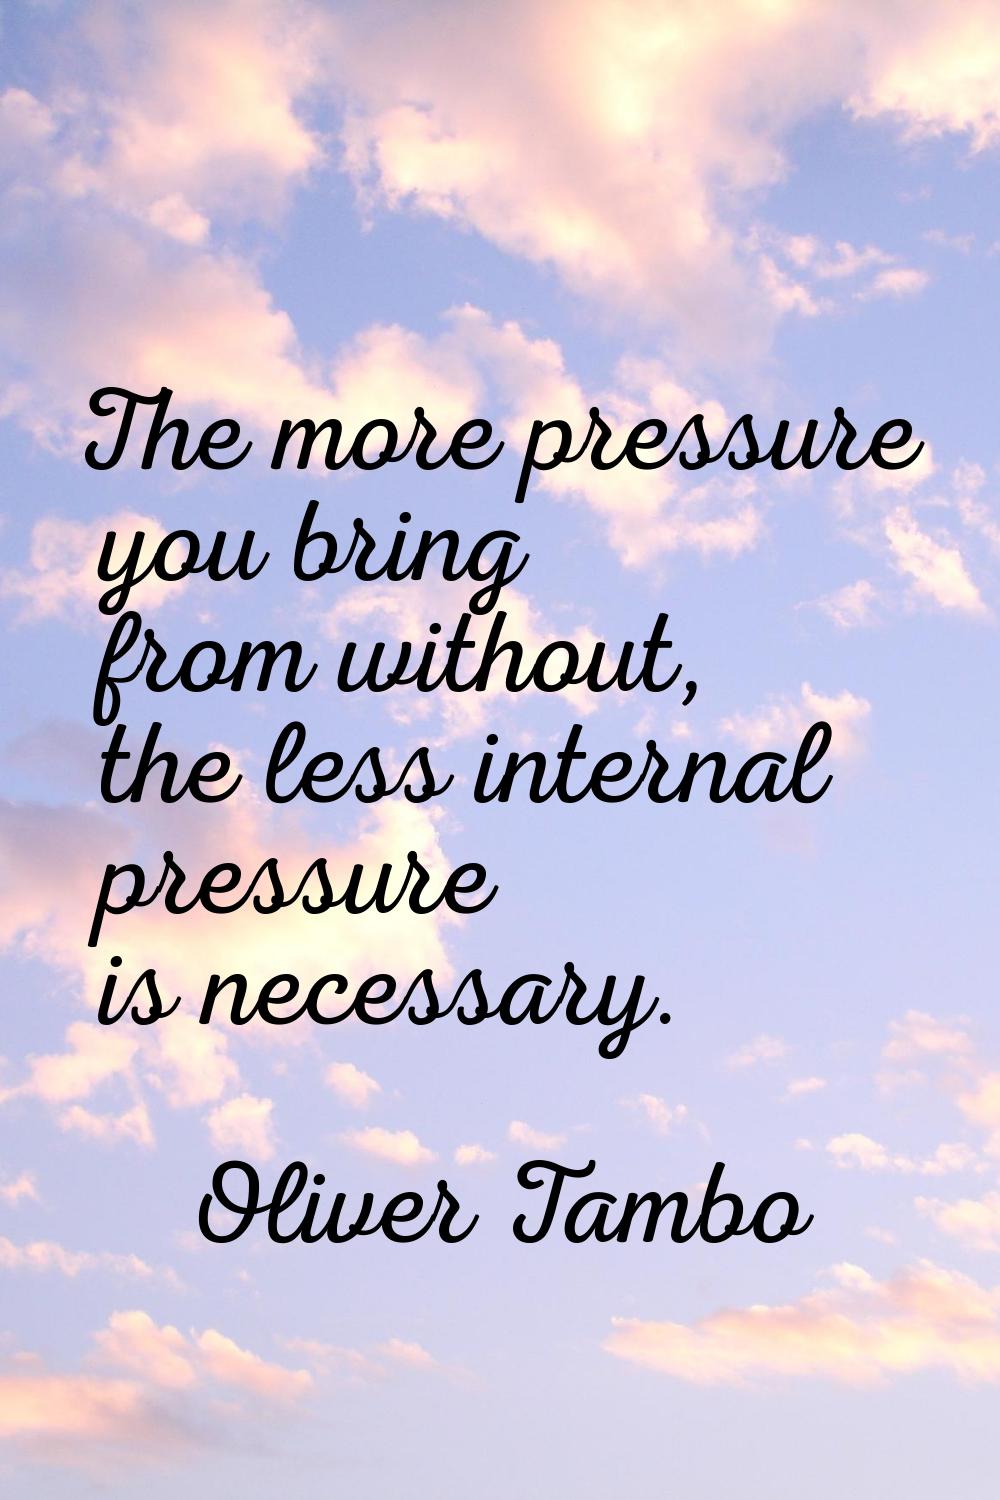 The more pressure you bring from without, the less internal pressure is necessary.